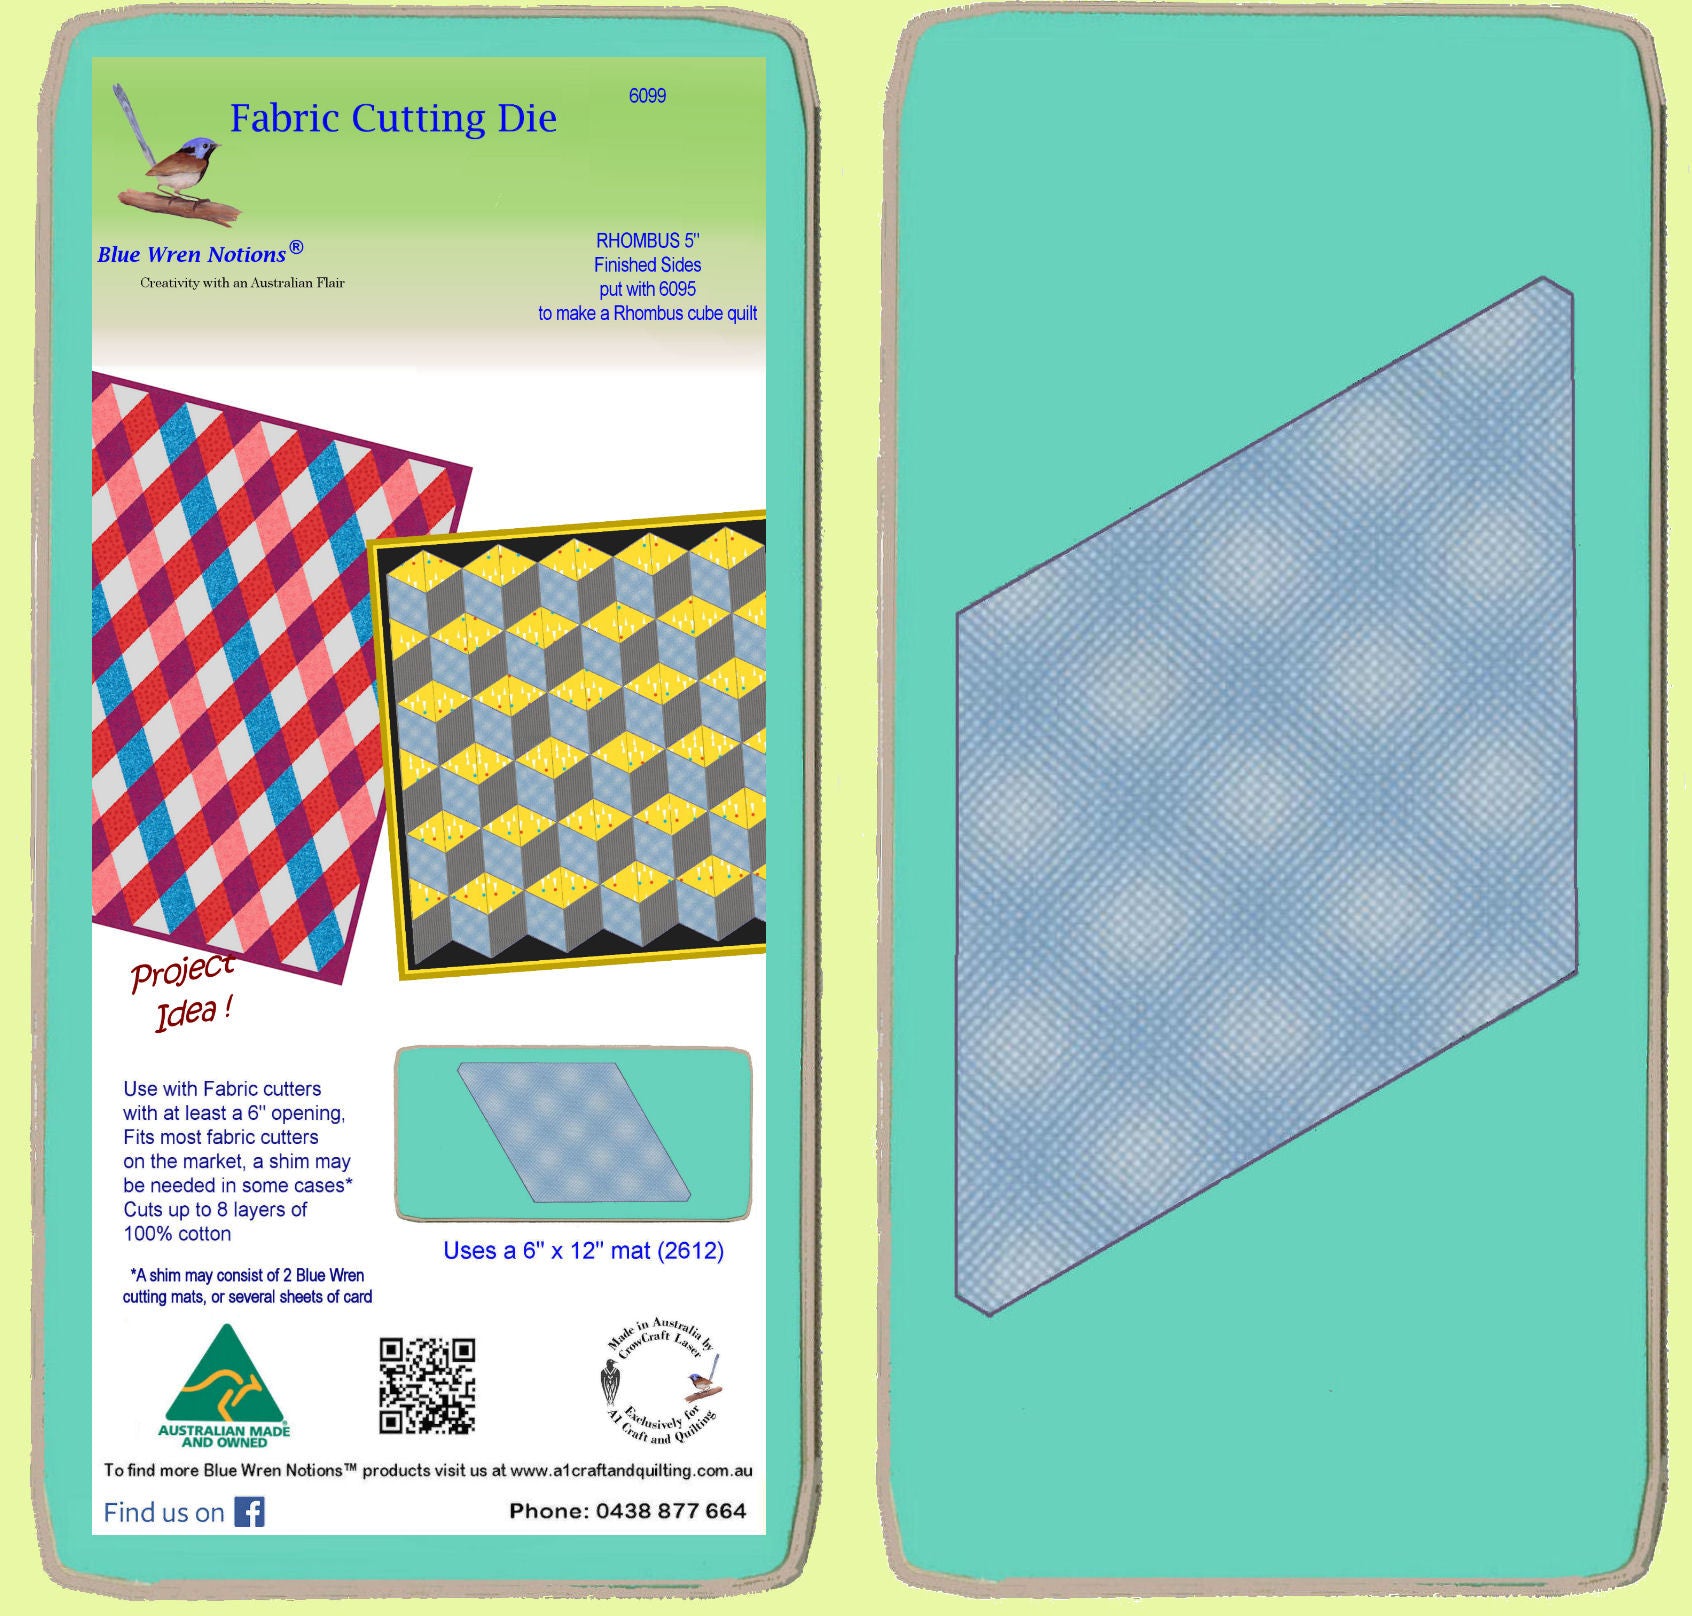 Rhombus/Diamond 5" finished sides - 6099 - includes cutting mat